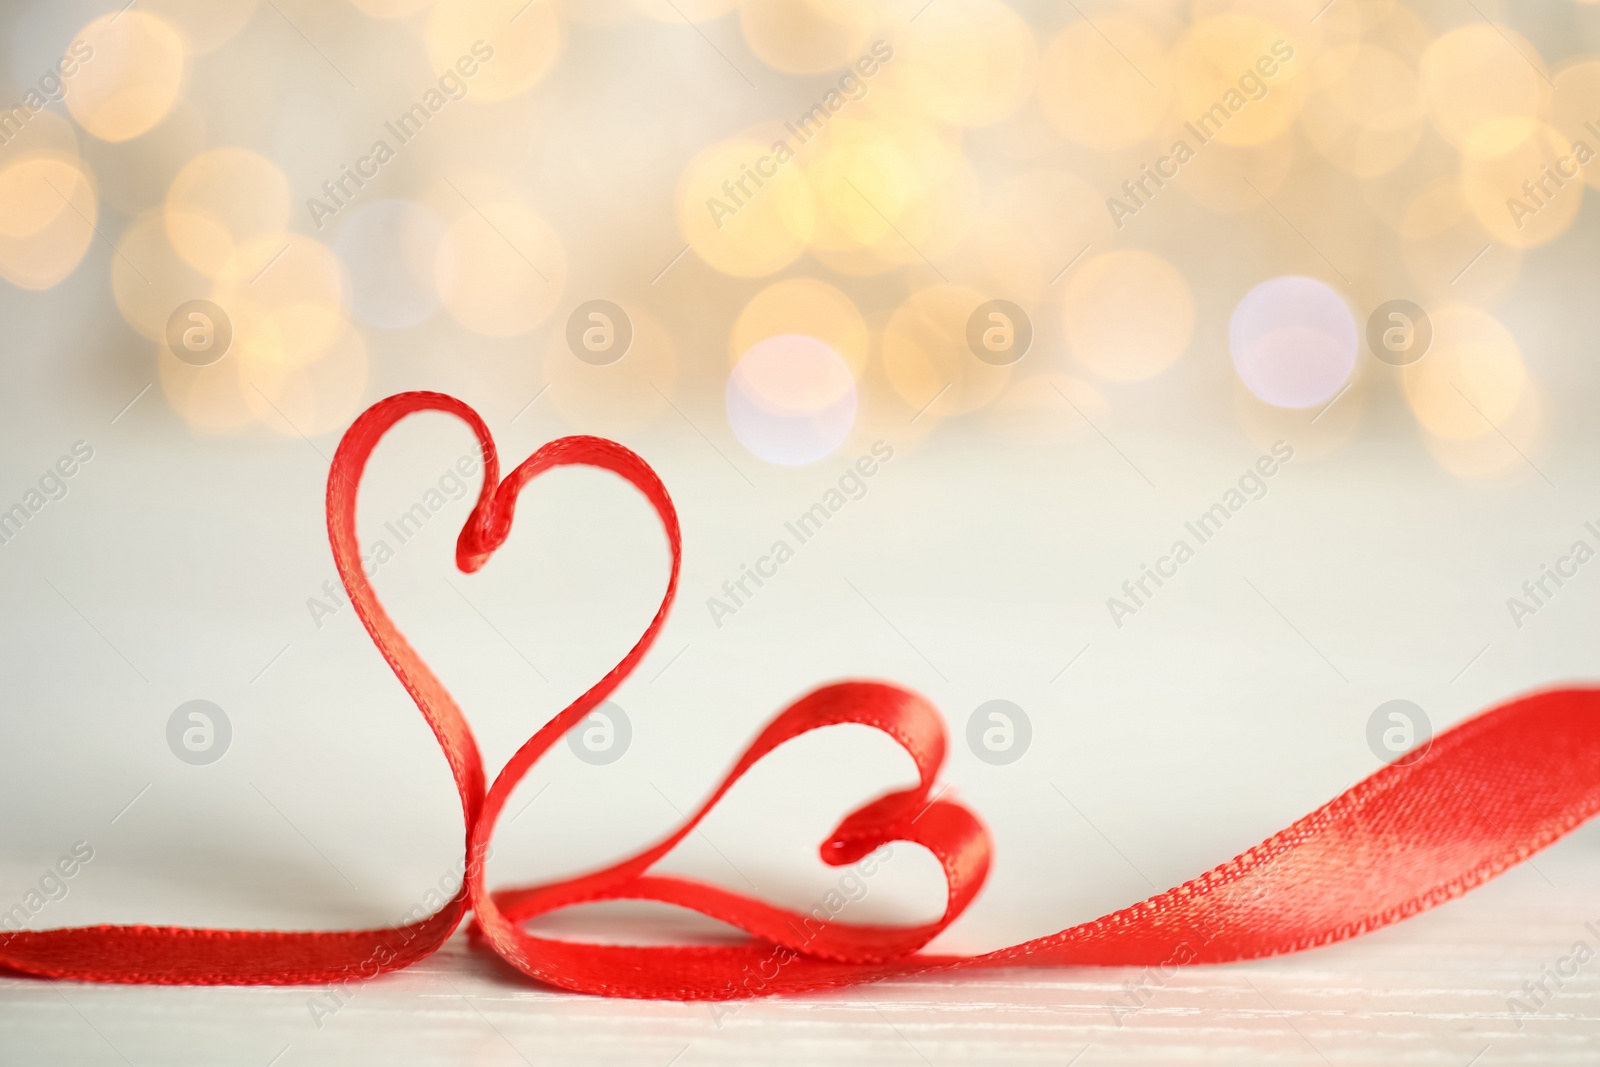 Photo of Two hearts made of red ribbon on table against blurred lights, space for text. St. Valentine's day card